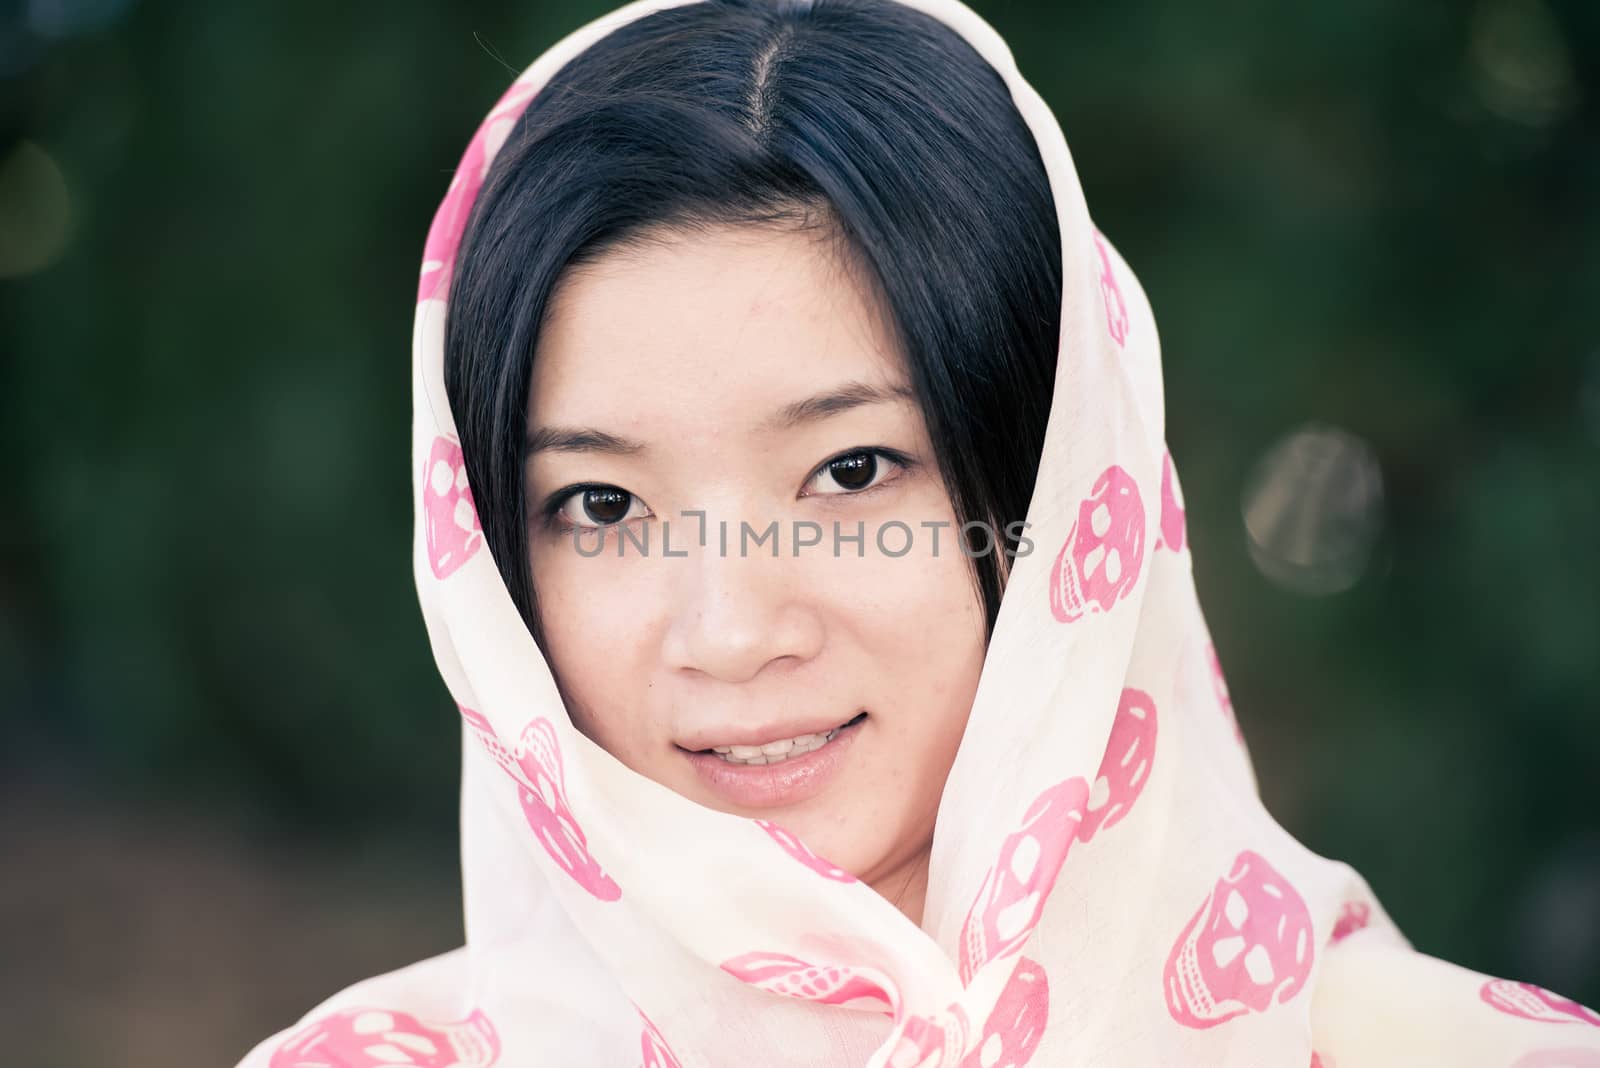 Detailed portrait of beautiful young woman with skull covering head